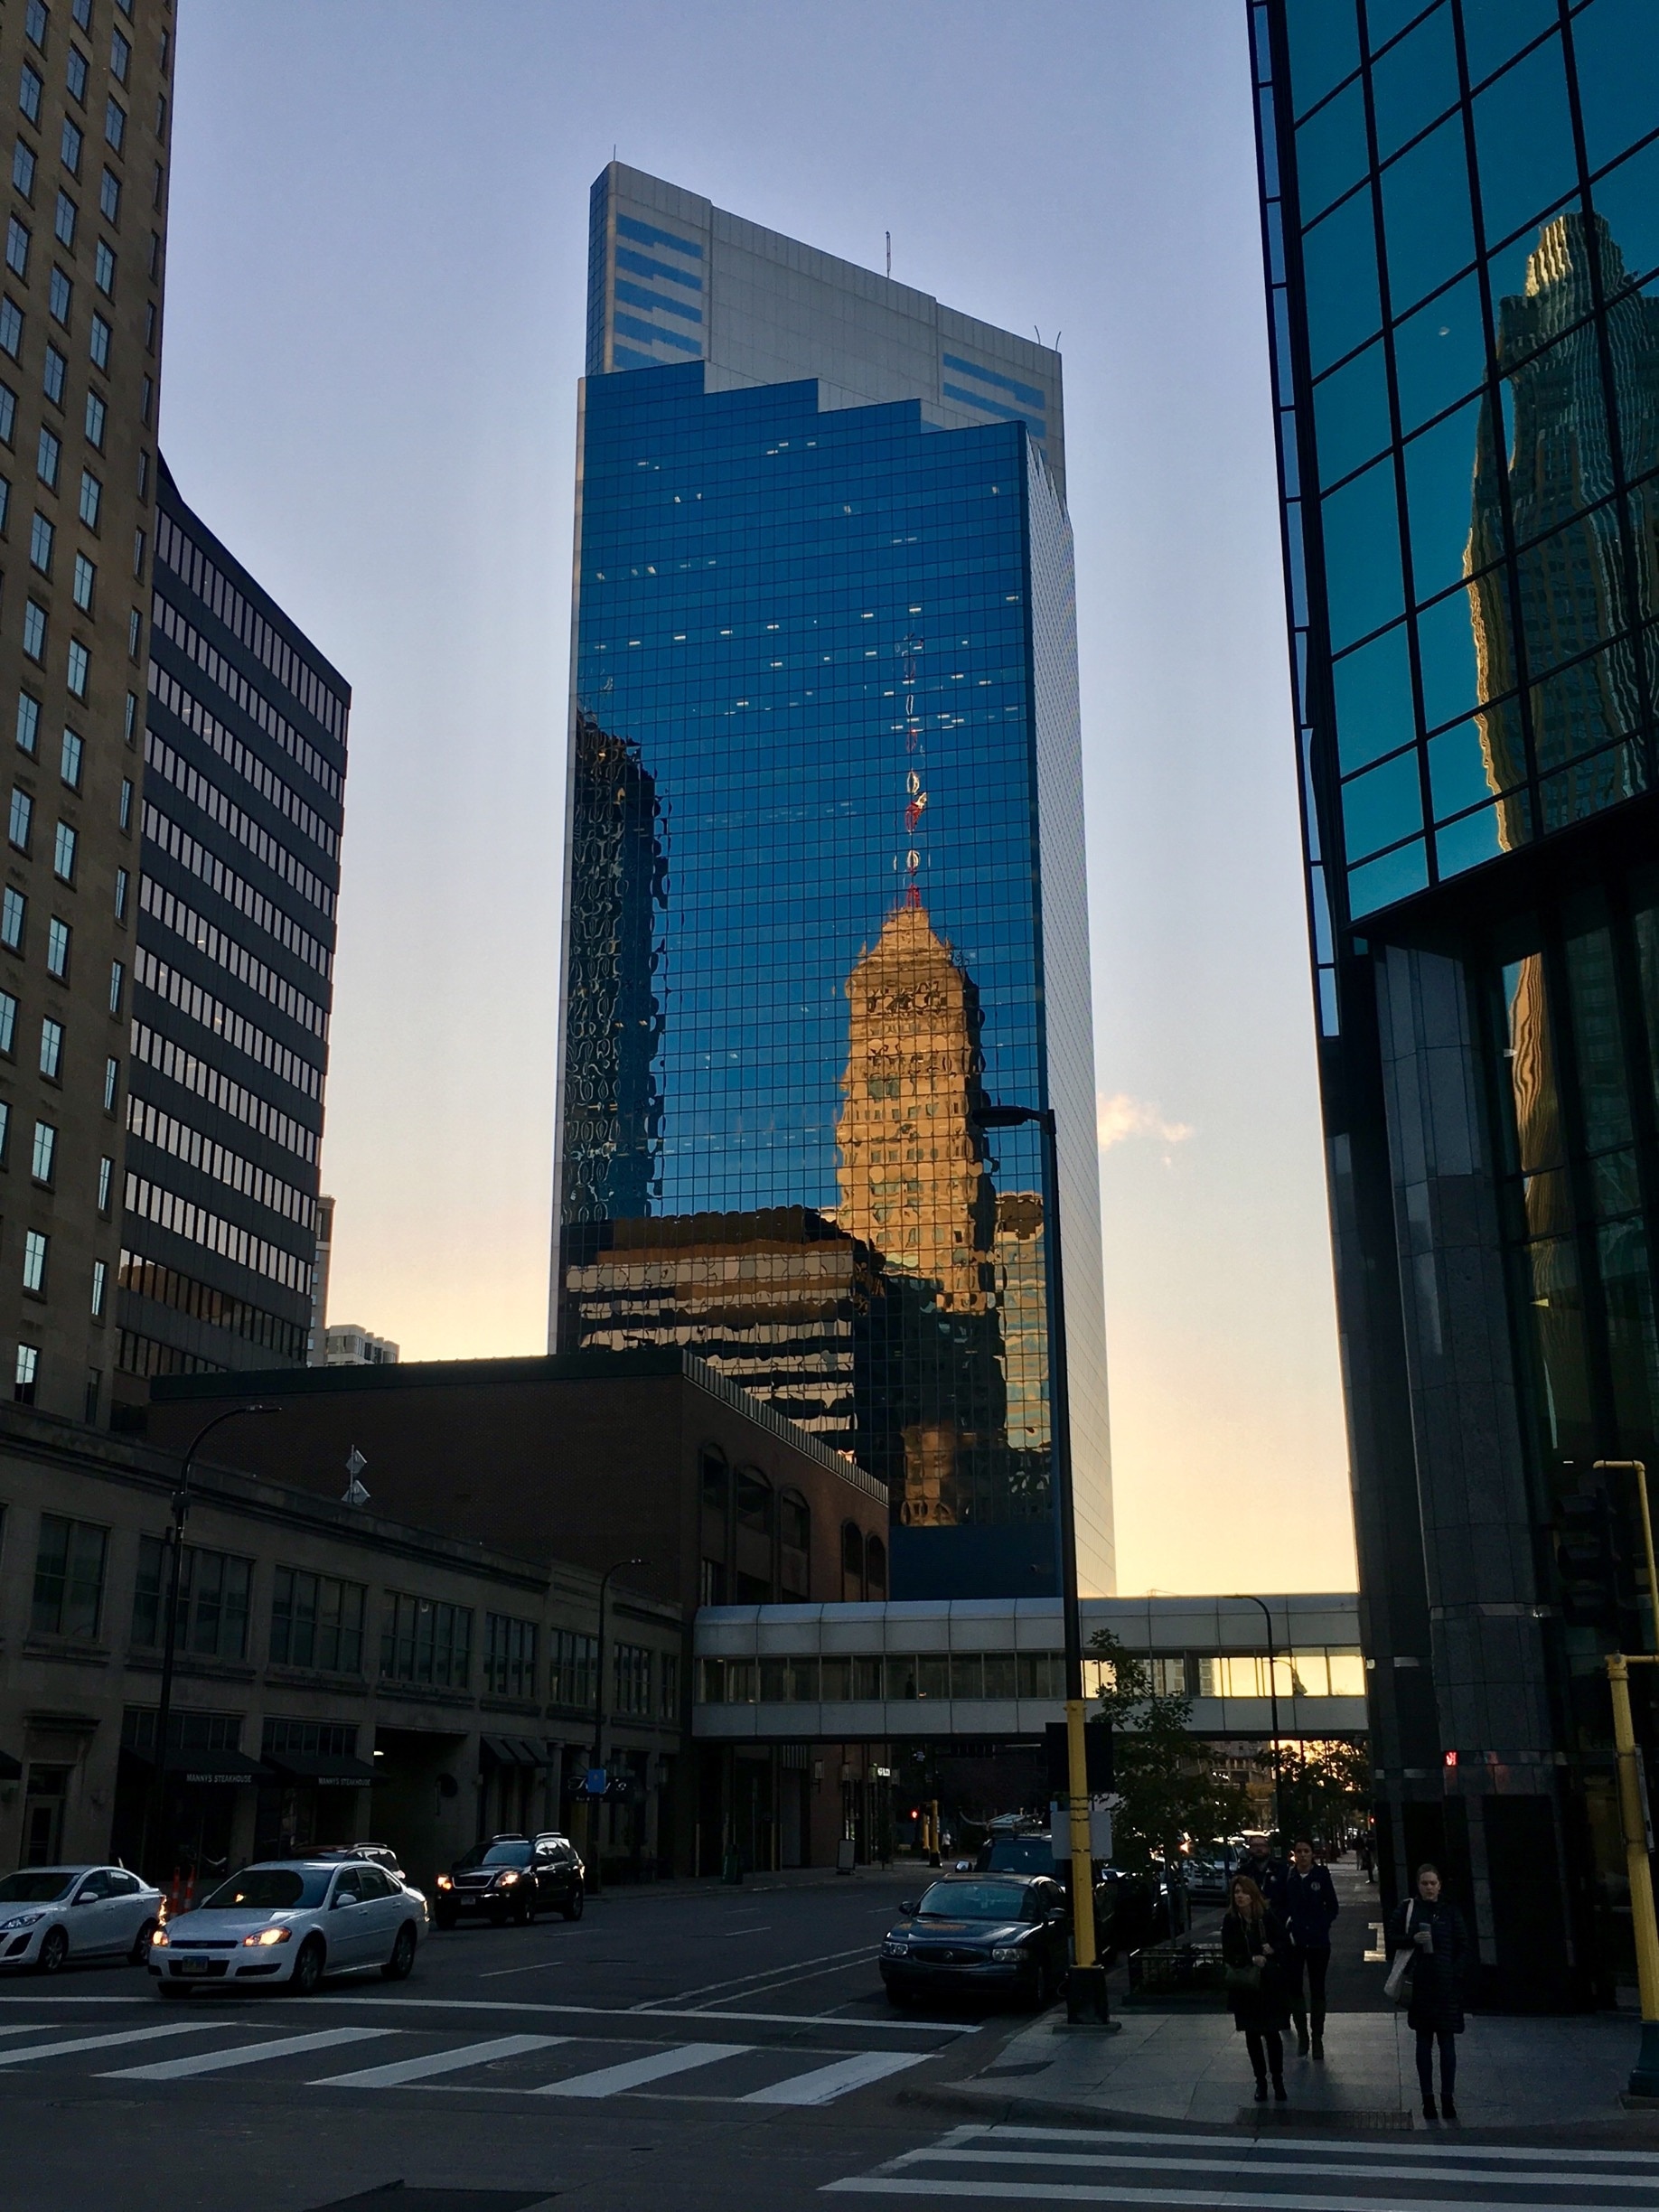 I love how the historic Foshay tower is reflected in the newer skyscraper. The Foshay was once the tallest standing building in Minneapolis from 1929-1972, and shows a bit of what life may have been like back then. #UrbanJungle #Minneapolis